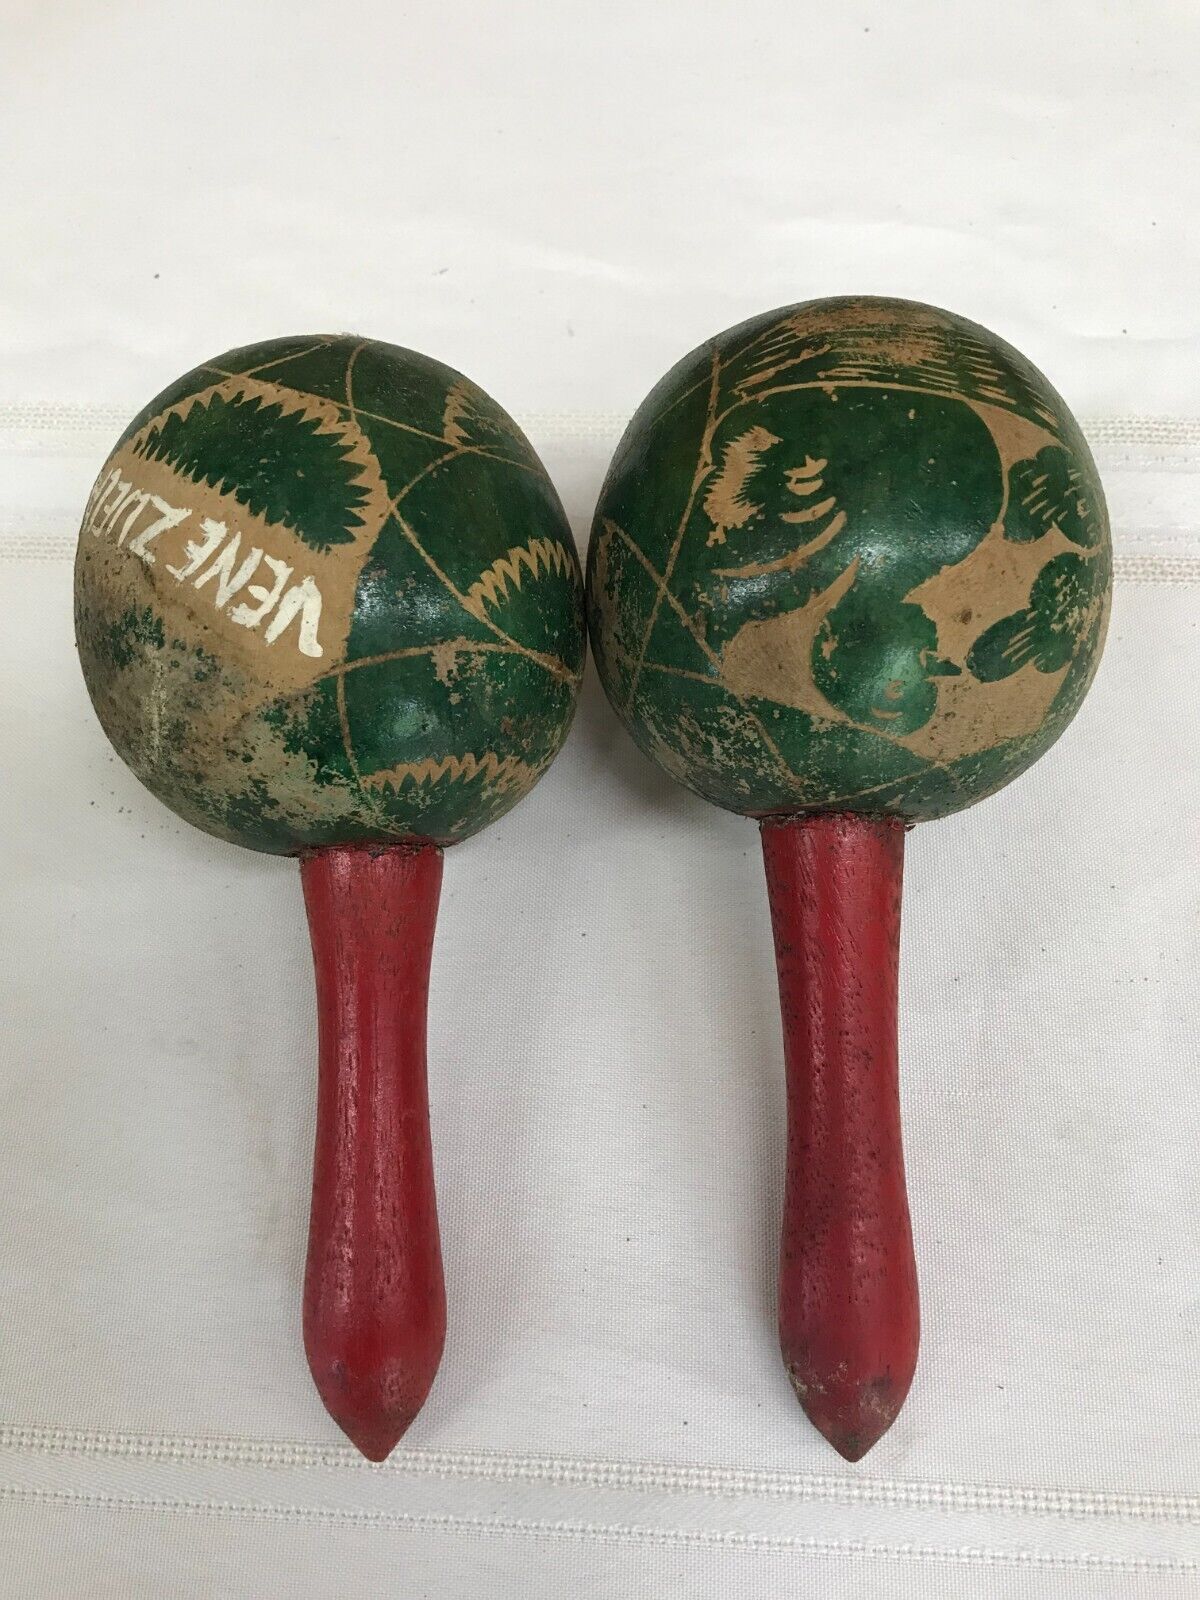 Vintage Hand Made Maracas - Hand Carved - Etched Design on All Sides Shabby  | eBay